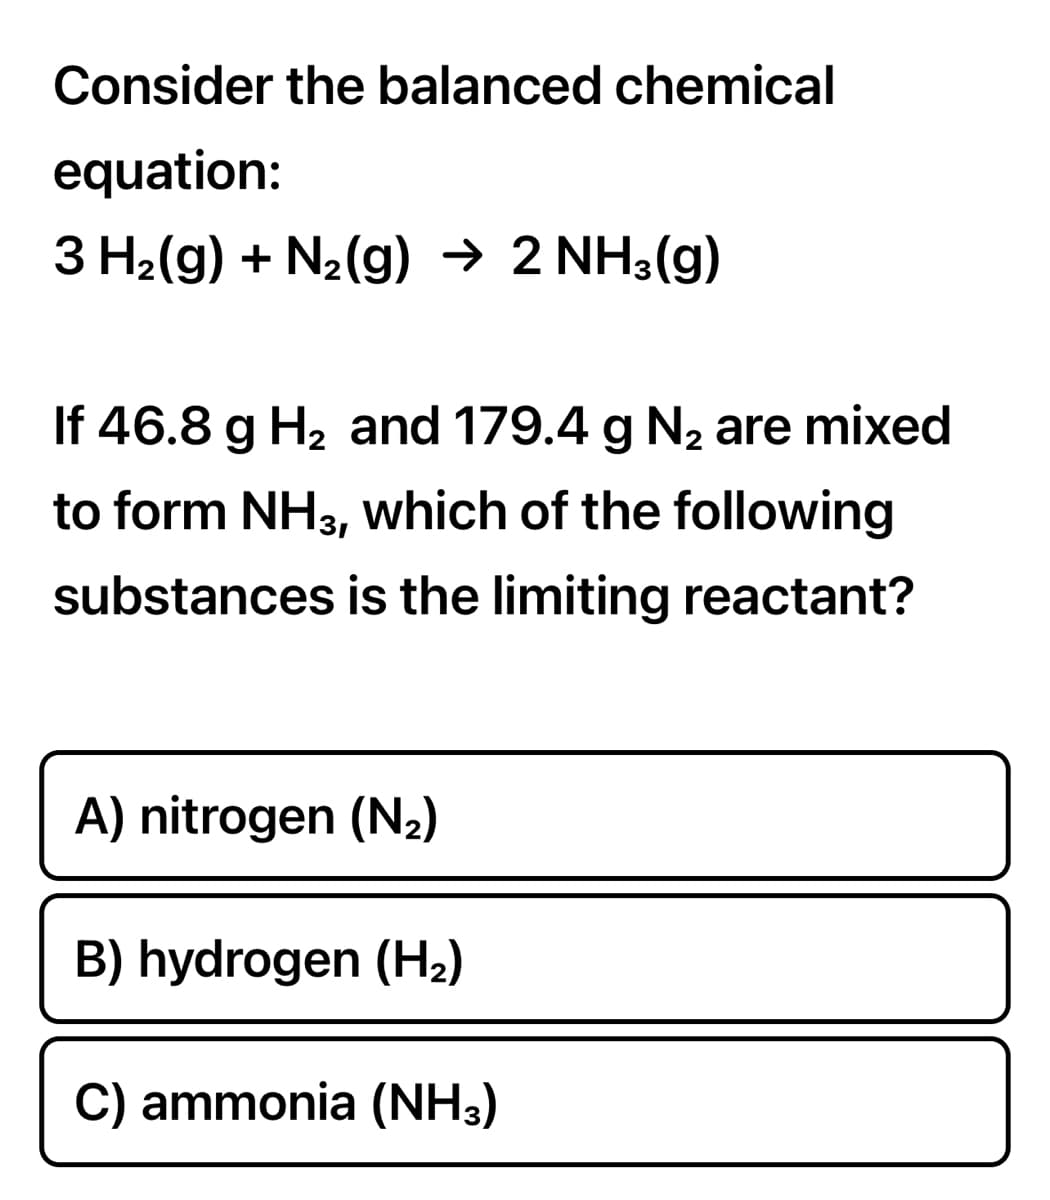 Consider the balanced chemical
equation:
3 H2(g) + N2(g) → 2 NH3(g)
If 46.8 g H2 and 179.4 g N2 are mixed
to form NH3, which of the following
substances is the limiting reactant?
A) nitrogen (N2)
B) hydrogen (H2)
C) ammonia (NH3)
